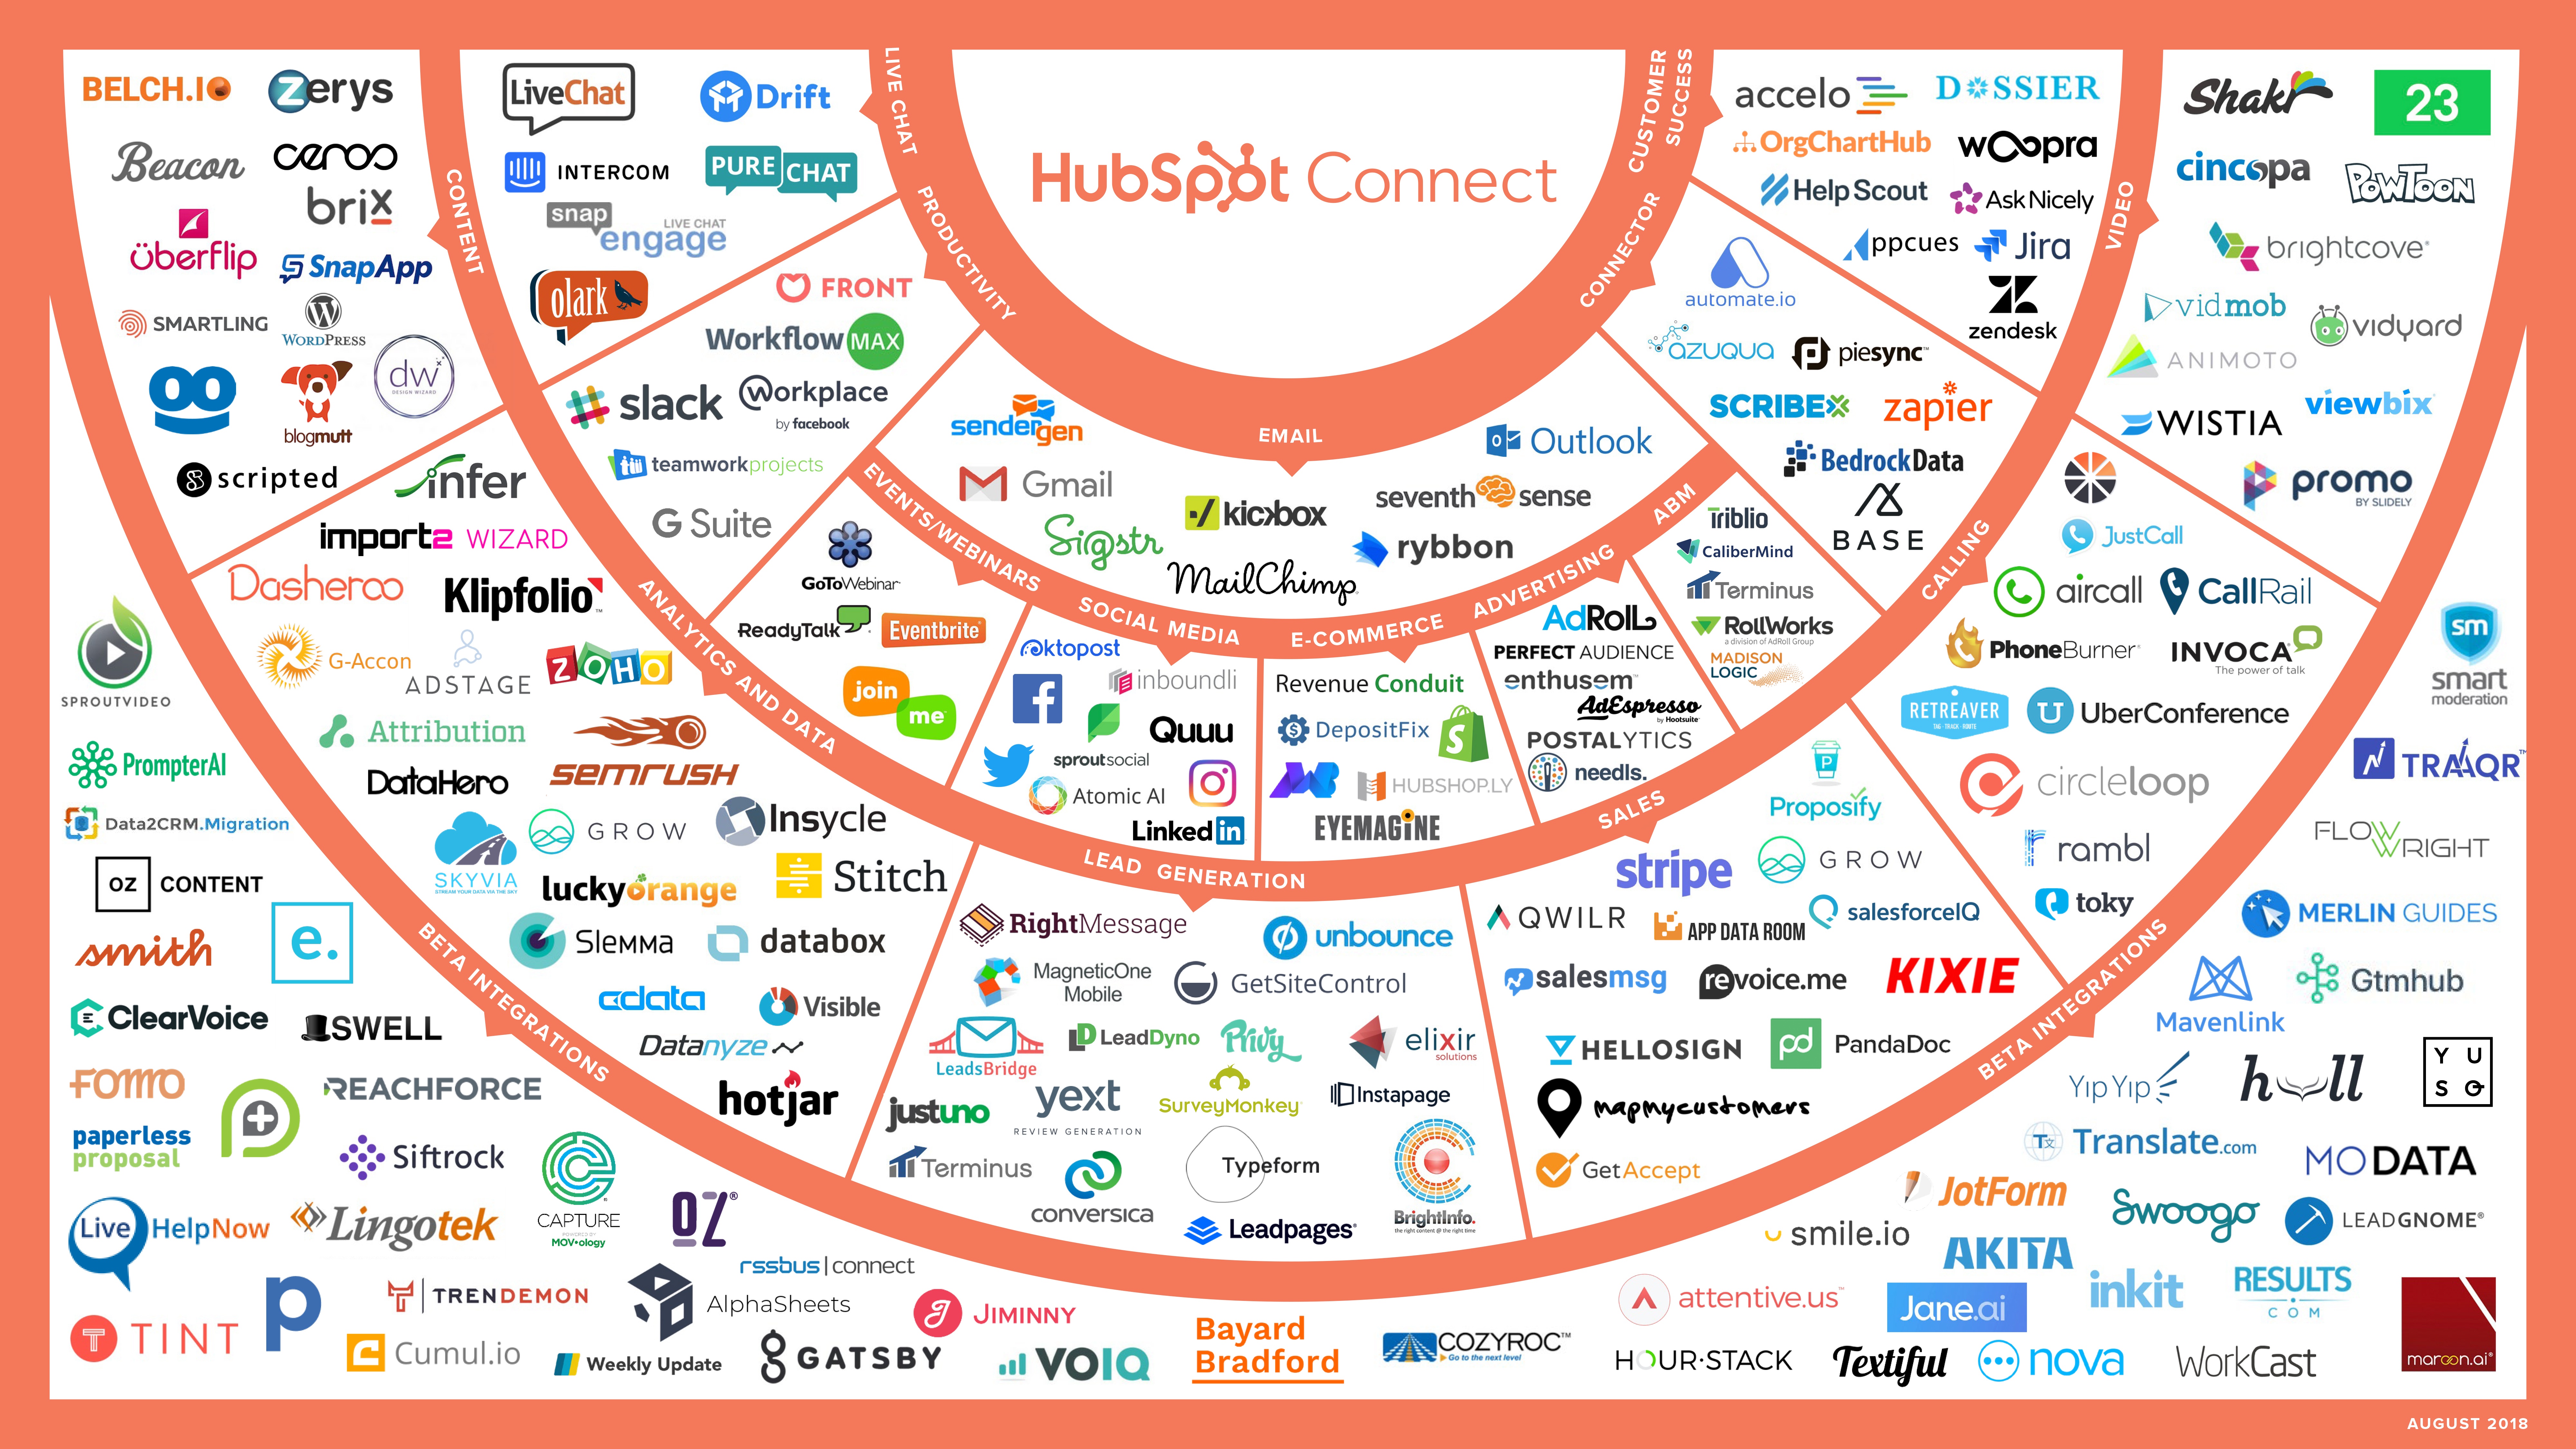 October 2018: New HubSpot Product Integrations This Month